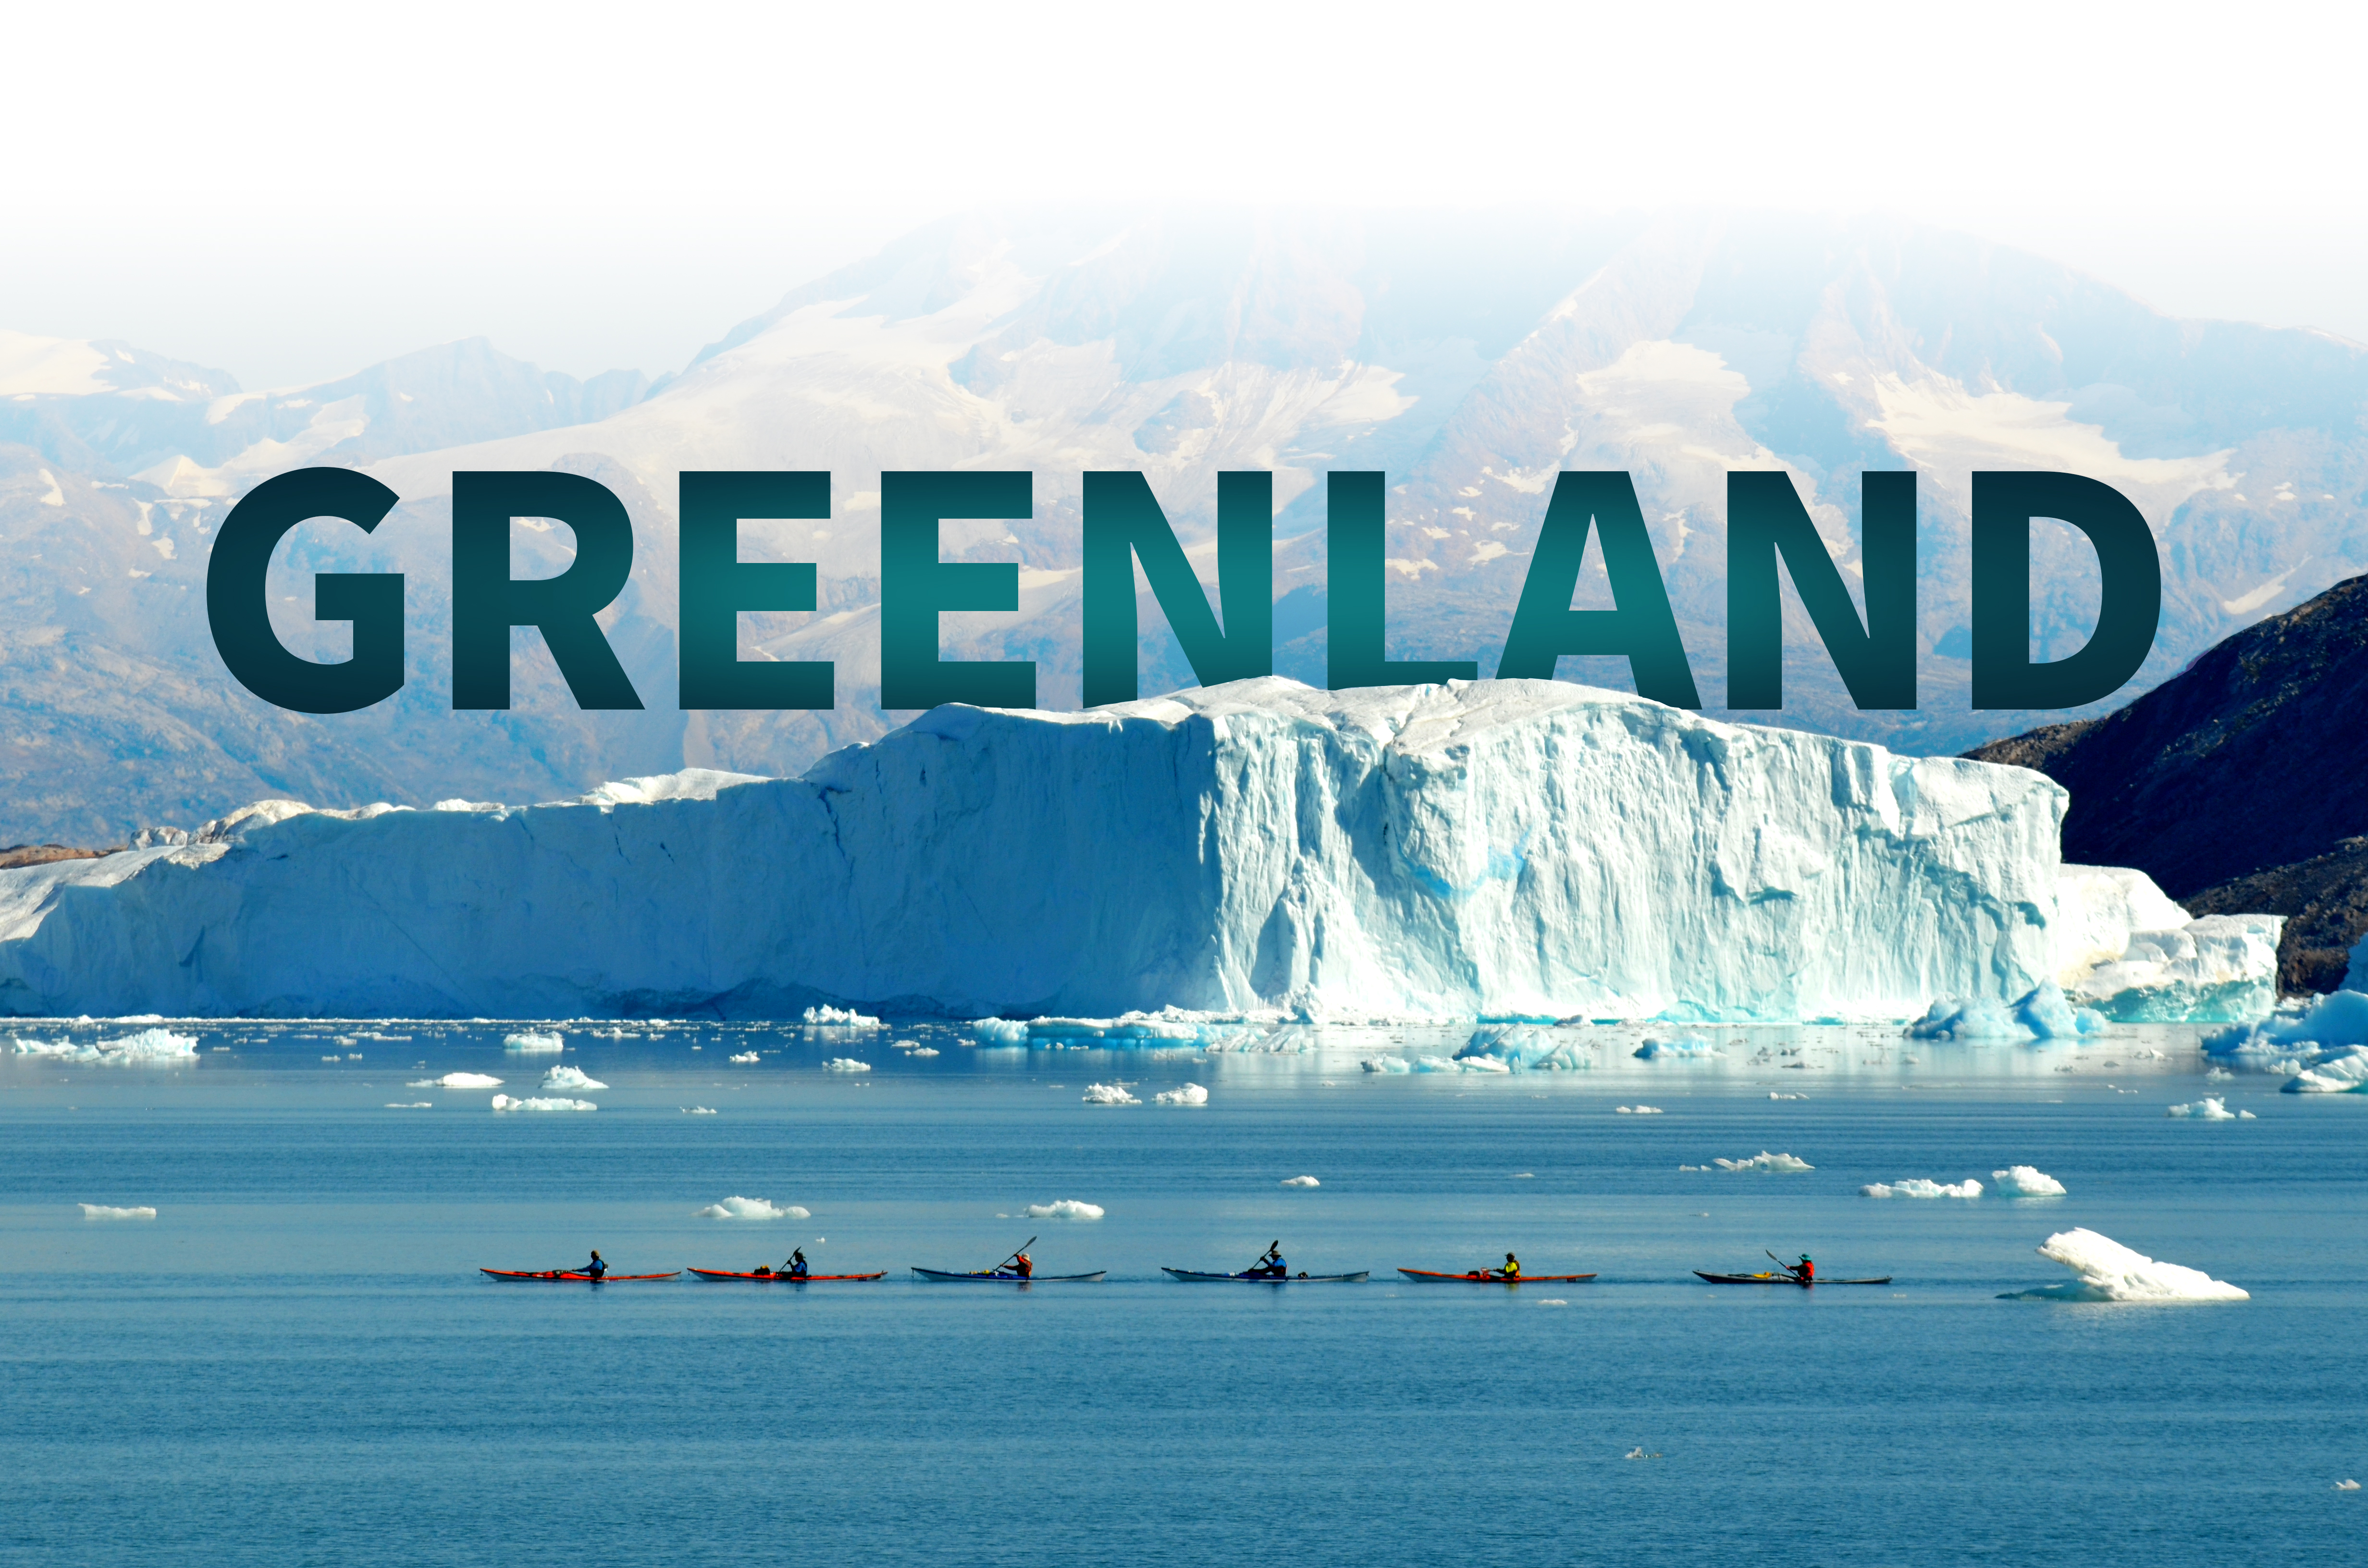 An image of Greenland with icebergs and mountains. Five kayakers are in the water moving from left to right.